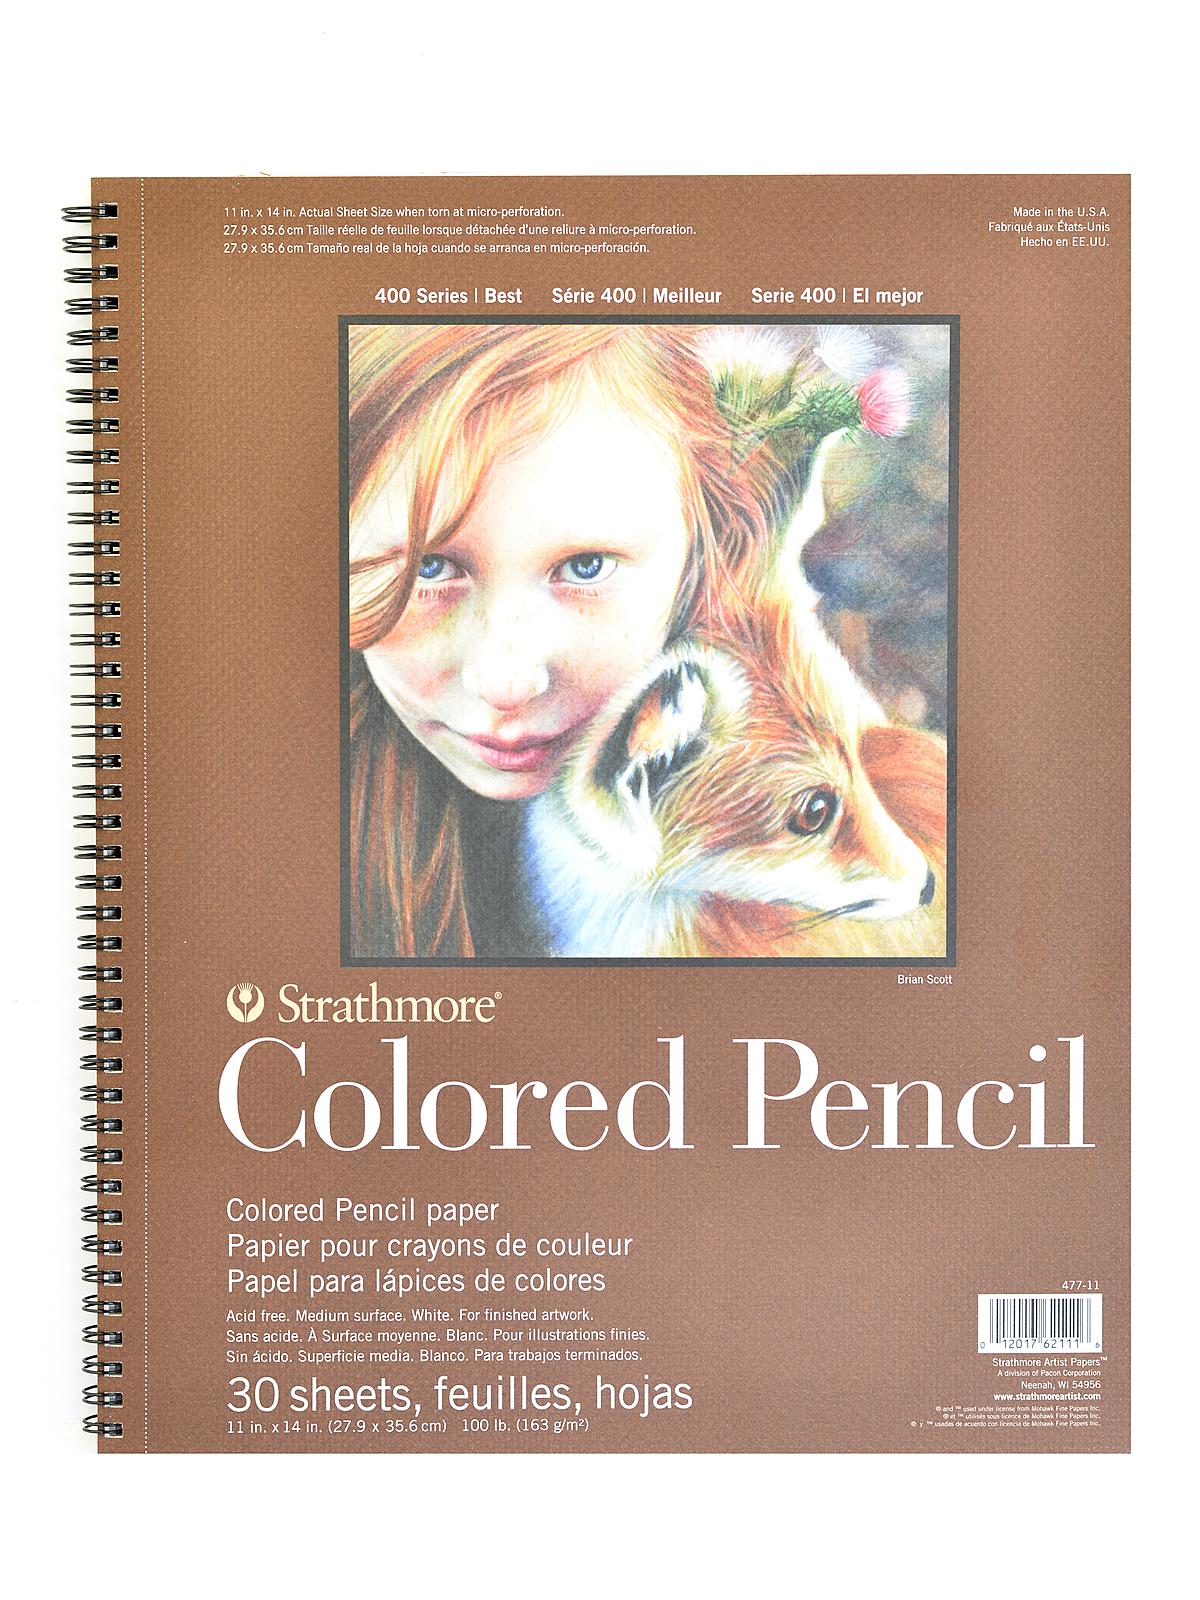 400 Series Colored Pencil Pad 11 In. X 14 In. 30 Sheets